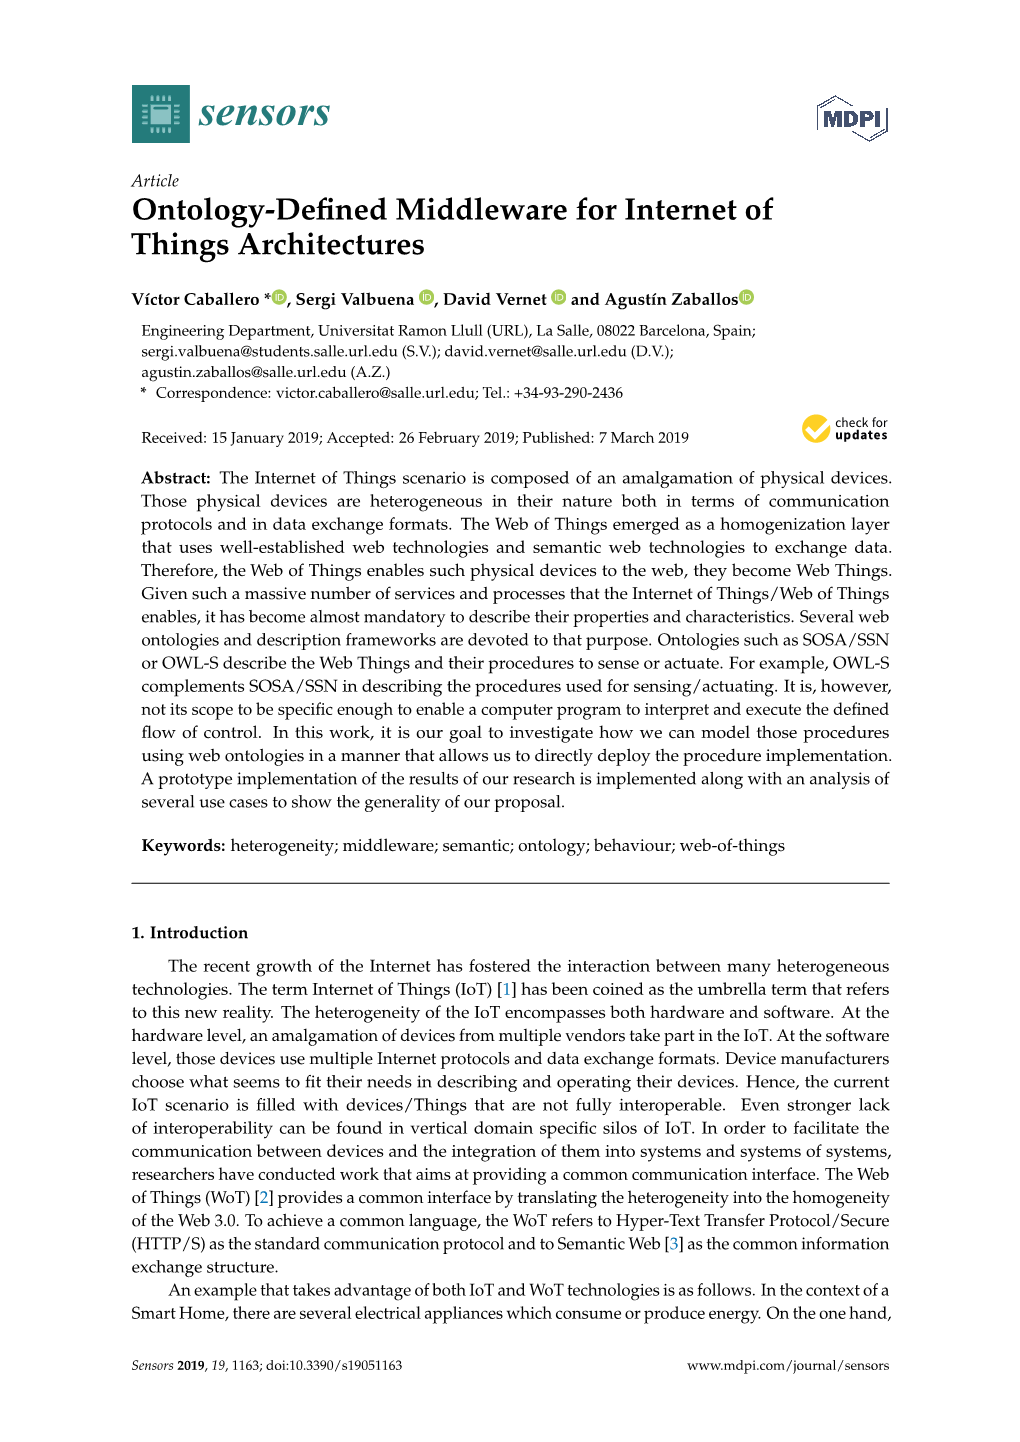 Ontology-Defined Middleware for Internet of Things Architectures